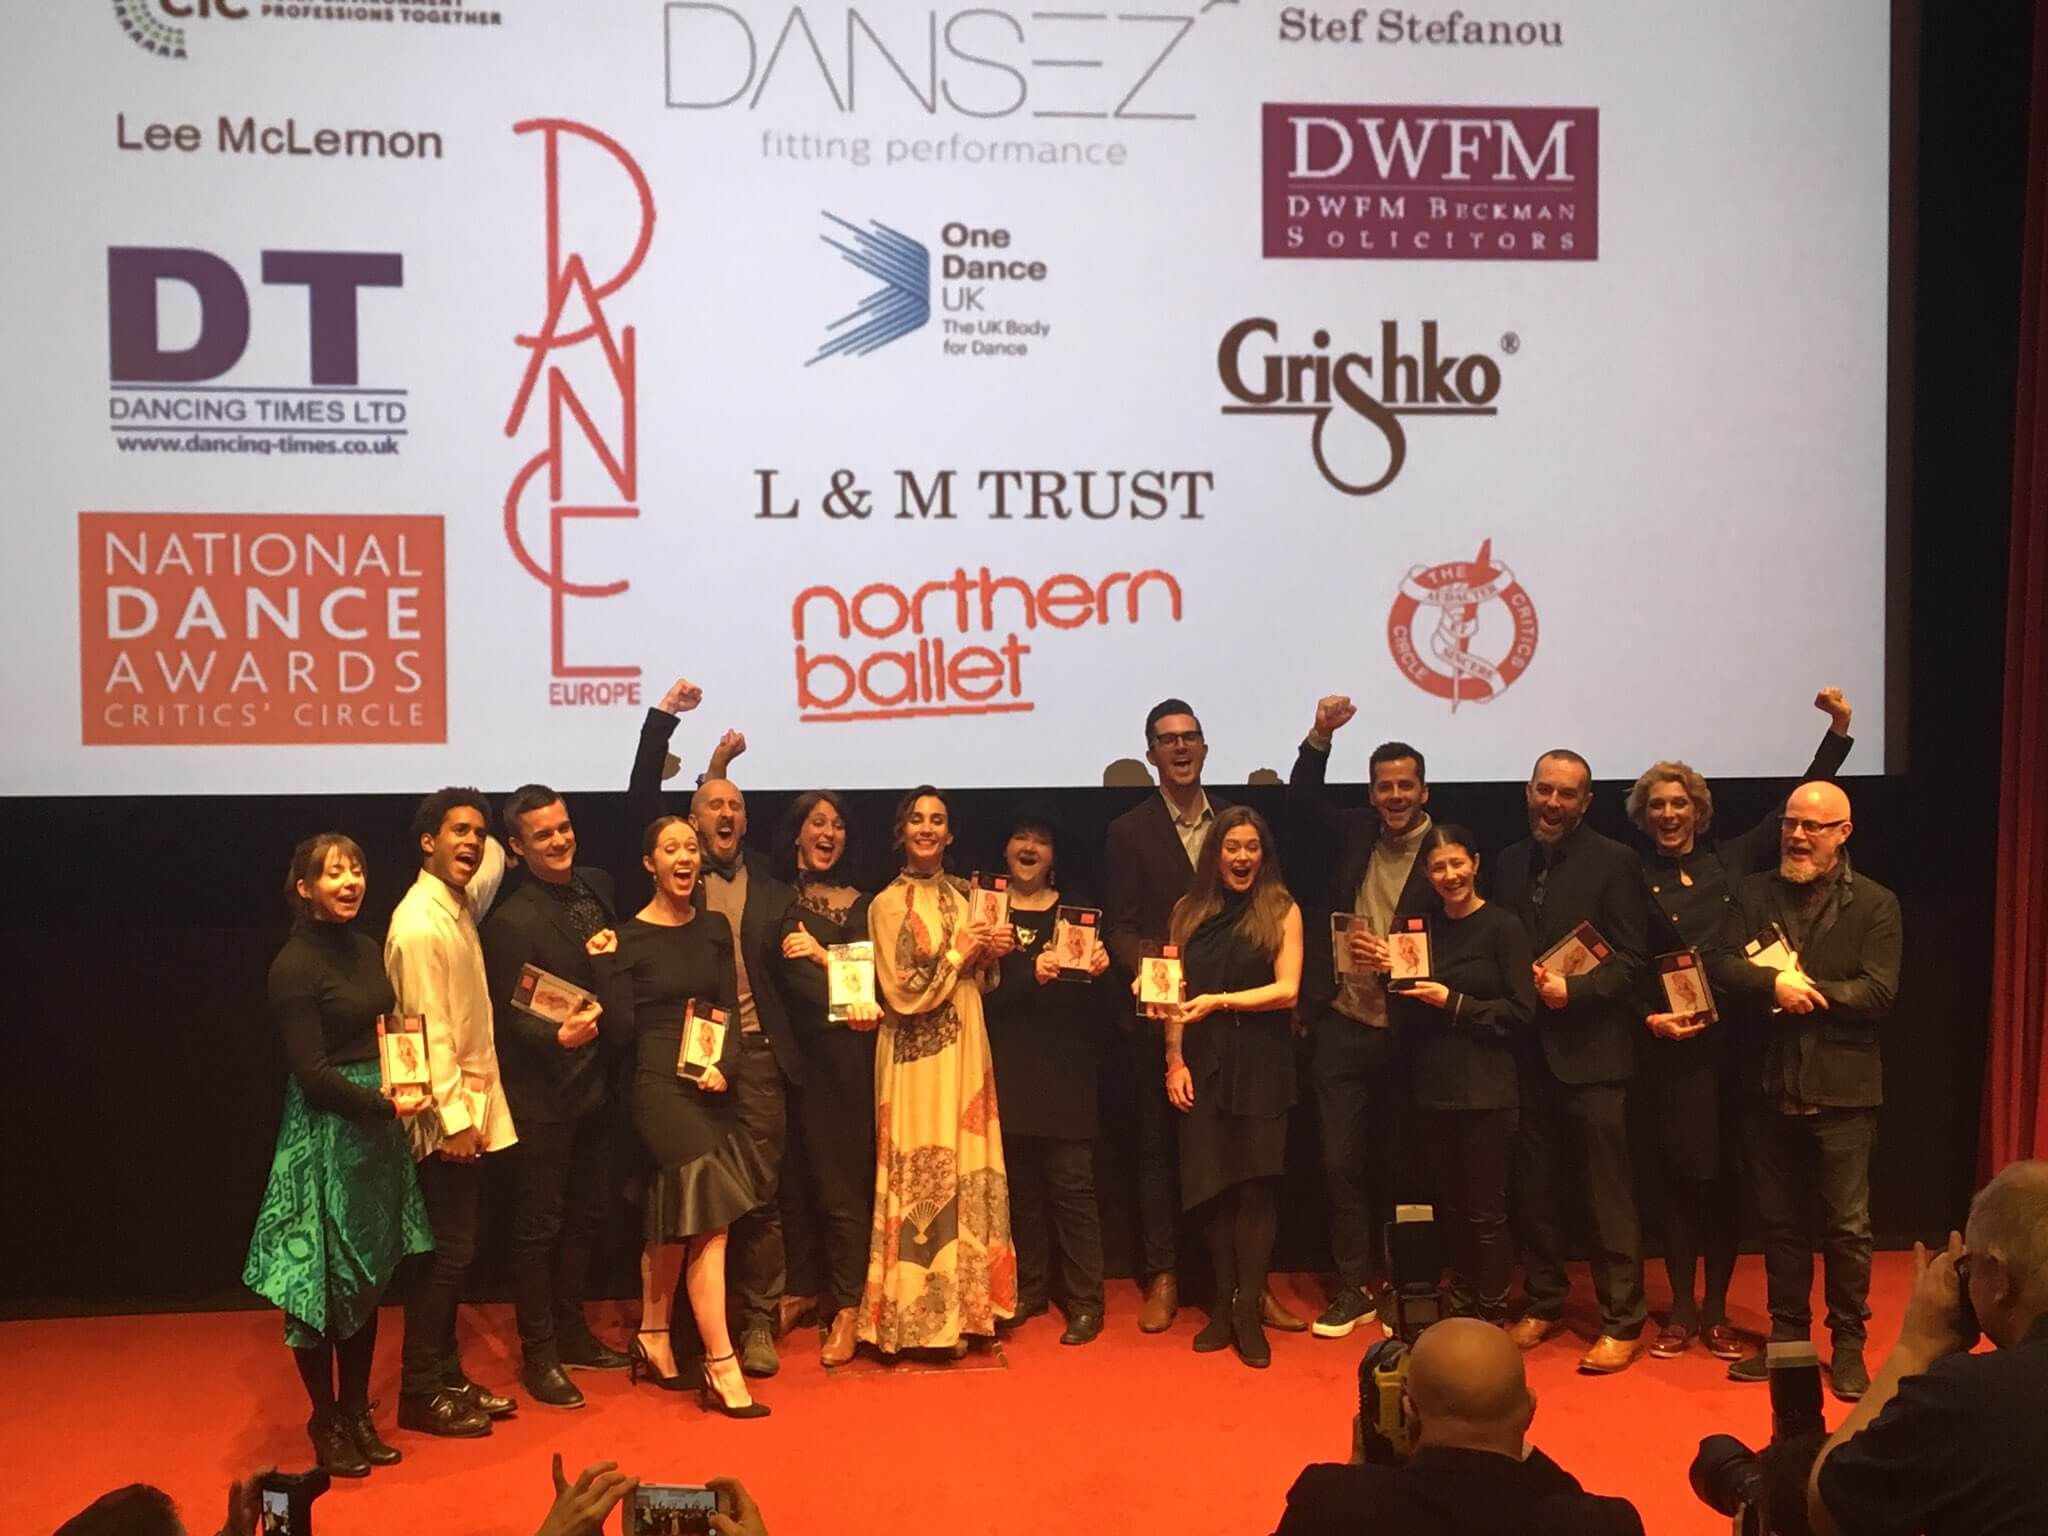 National Dance Awards 2017 winners at the Barbican Centre. Source: Twitter @NatDanceAwards